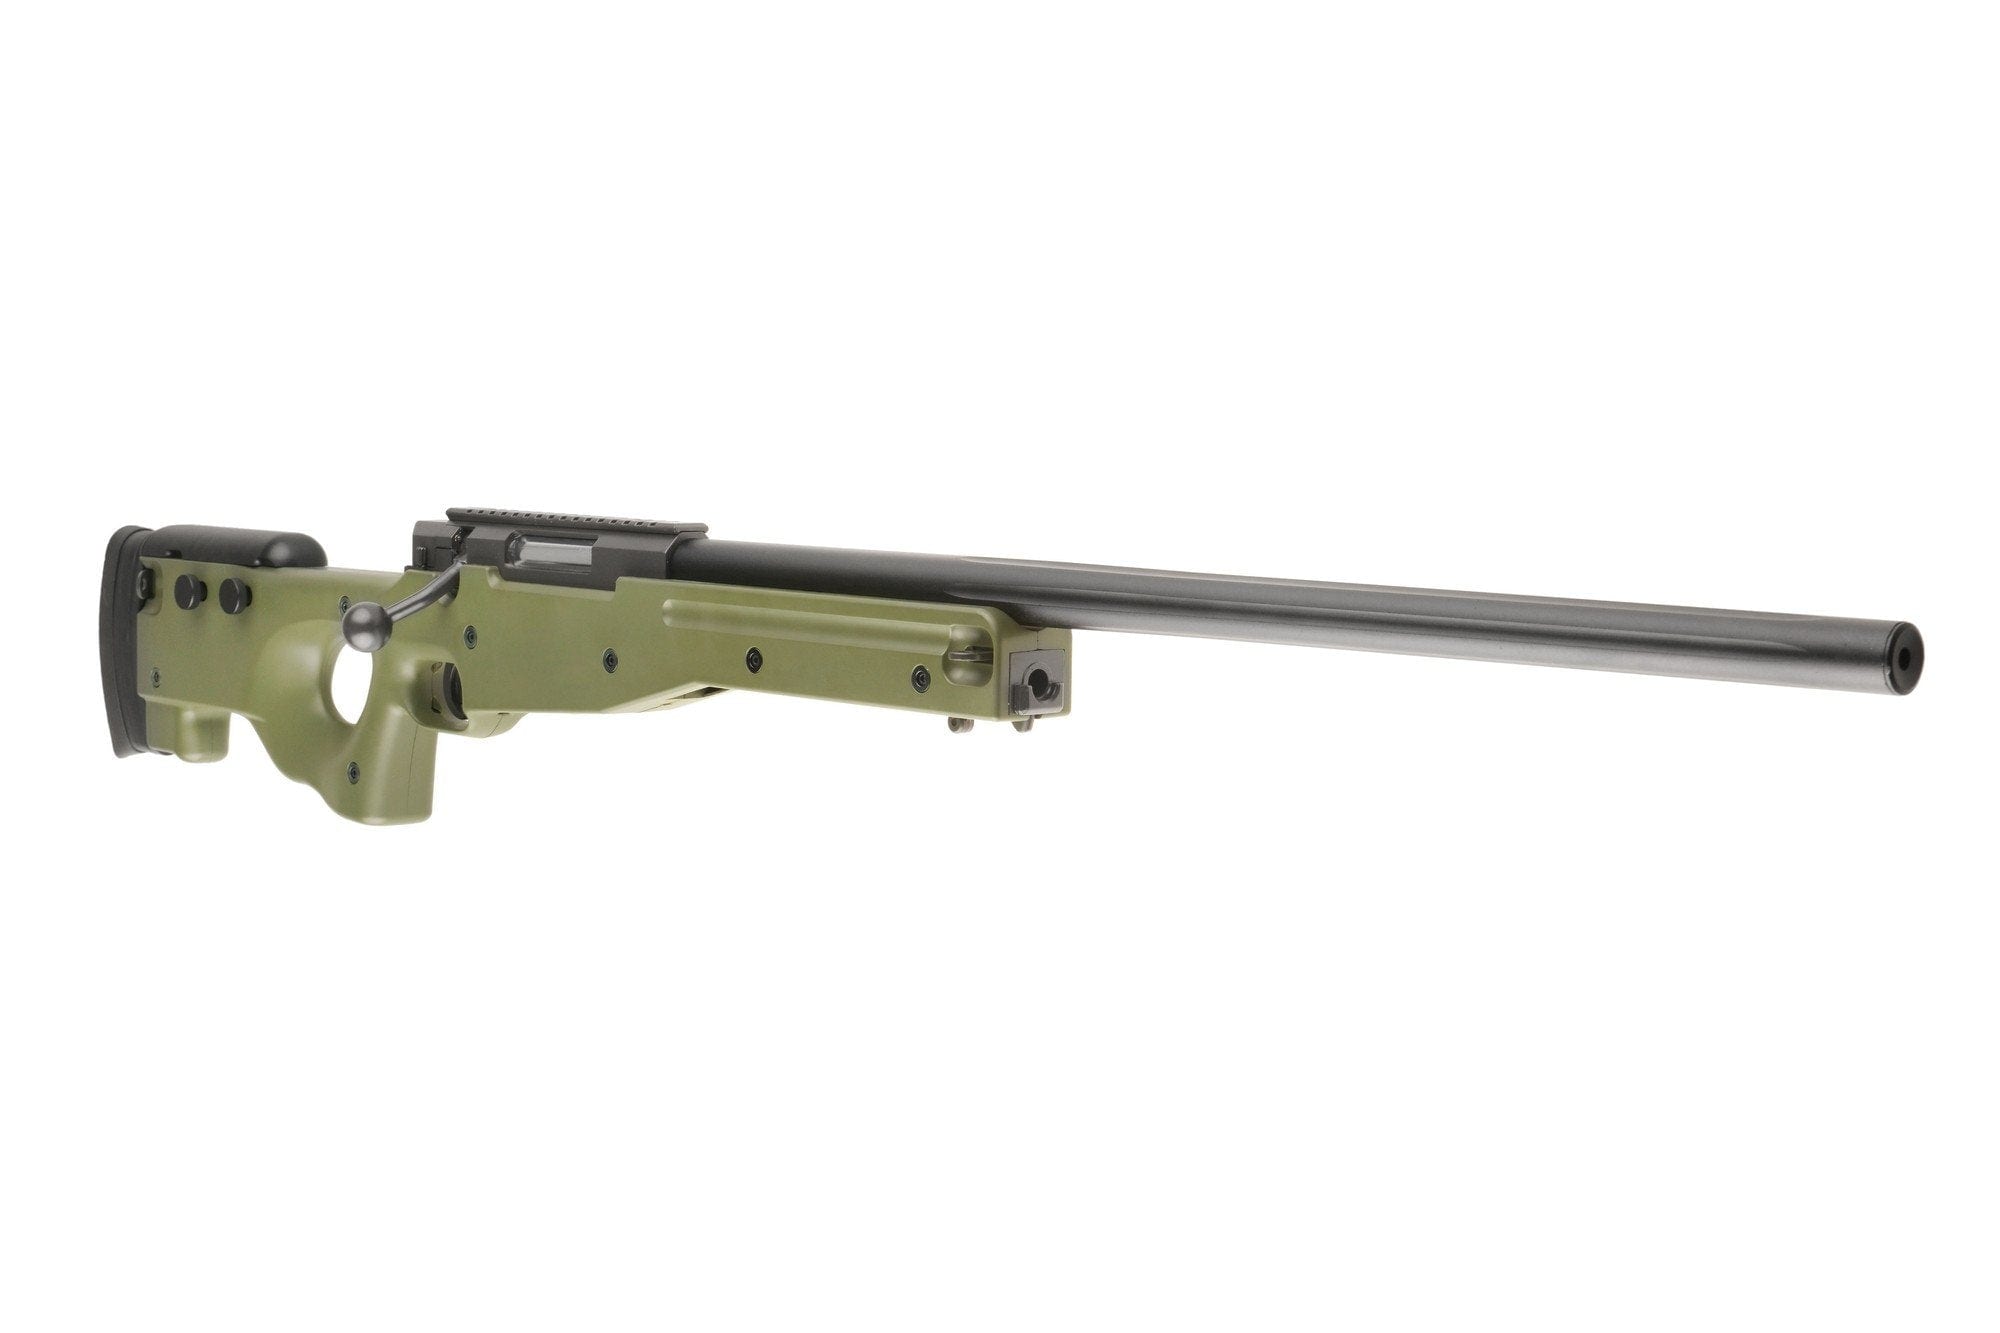 MB01 Sniper Rifle Replica - Olive Drab by WELL on Airsoft Mania Europe